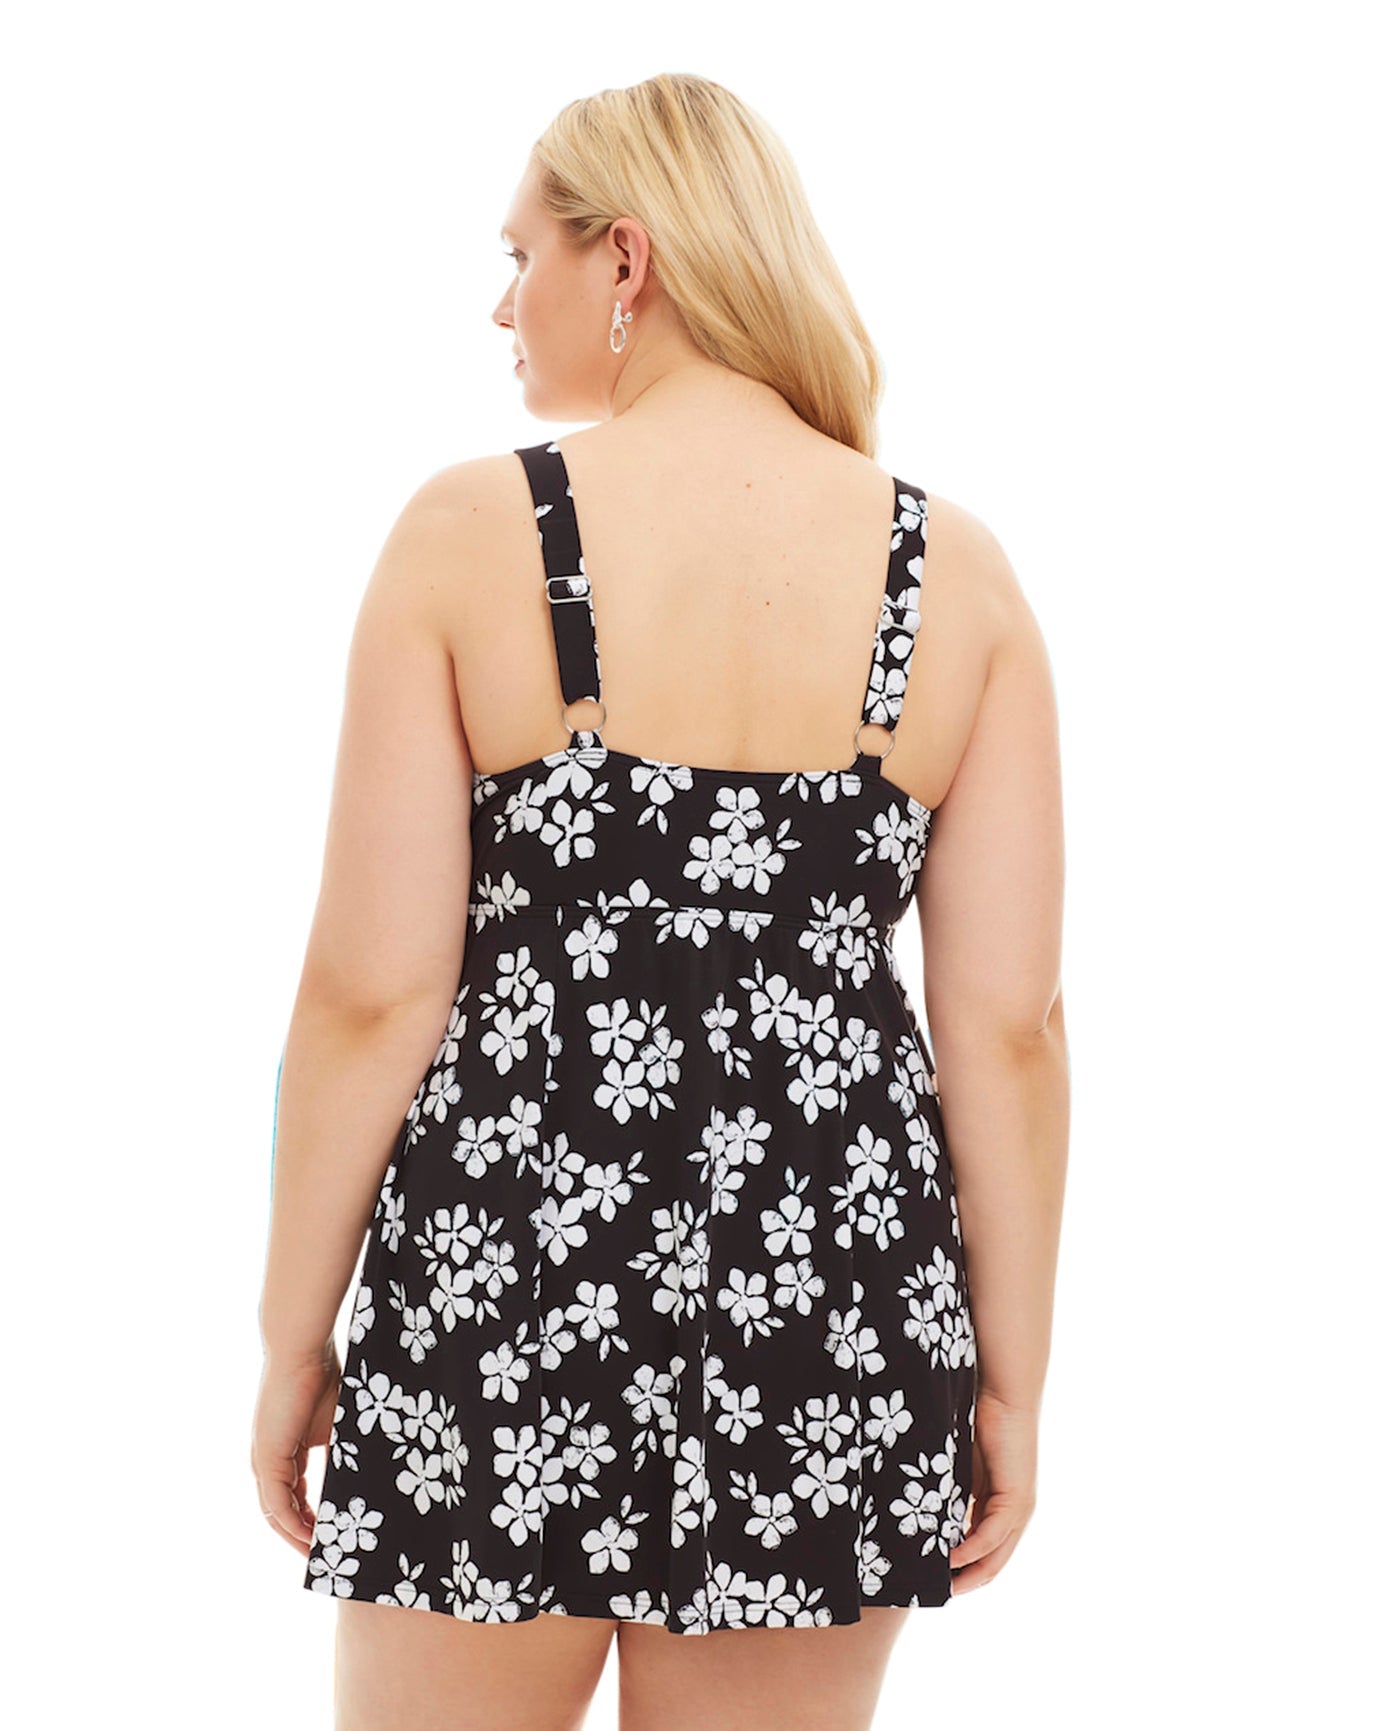 Back View Of Always For Me by Fit 4U Black and White Moonflower Plus Size Swimdress | AFM BLACK WHITE